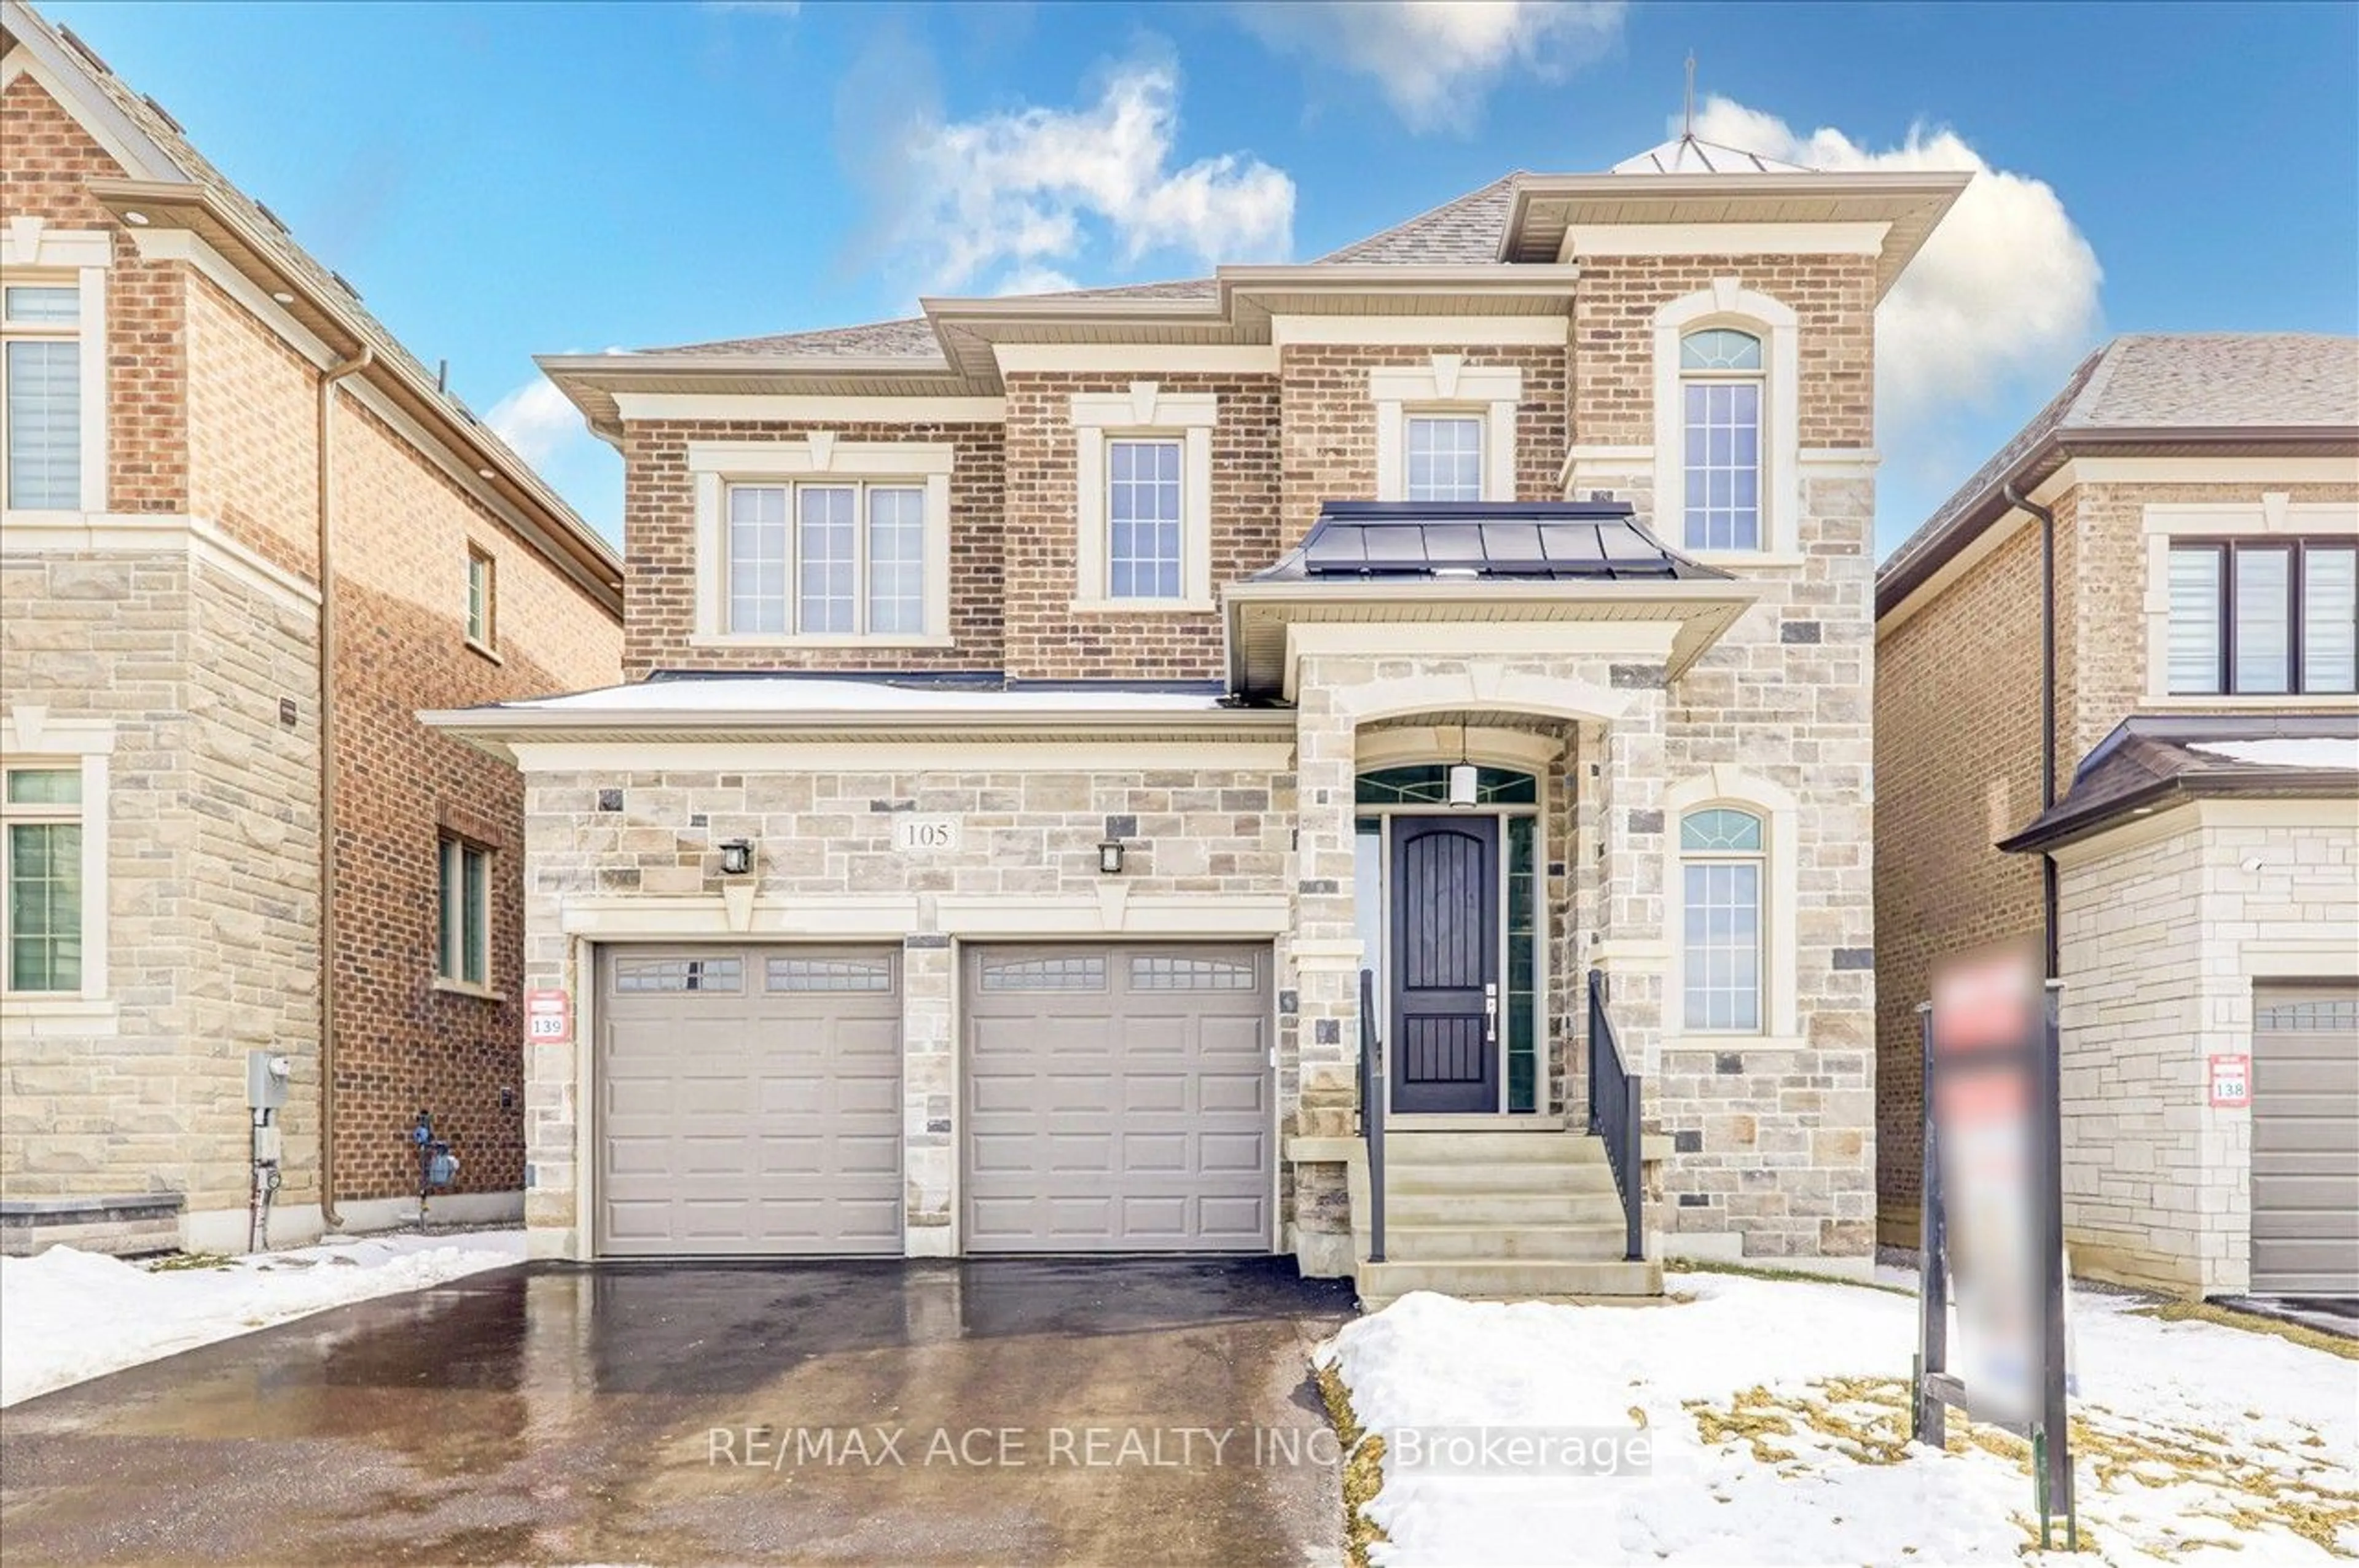 Home with brick exterior material for 105 Brant Dr, Vaughan Ontario L3L 0E8